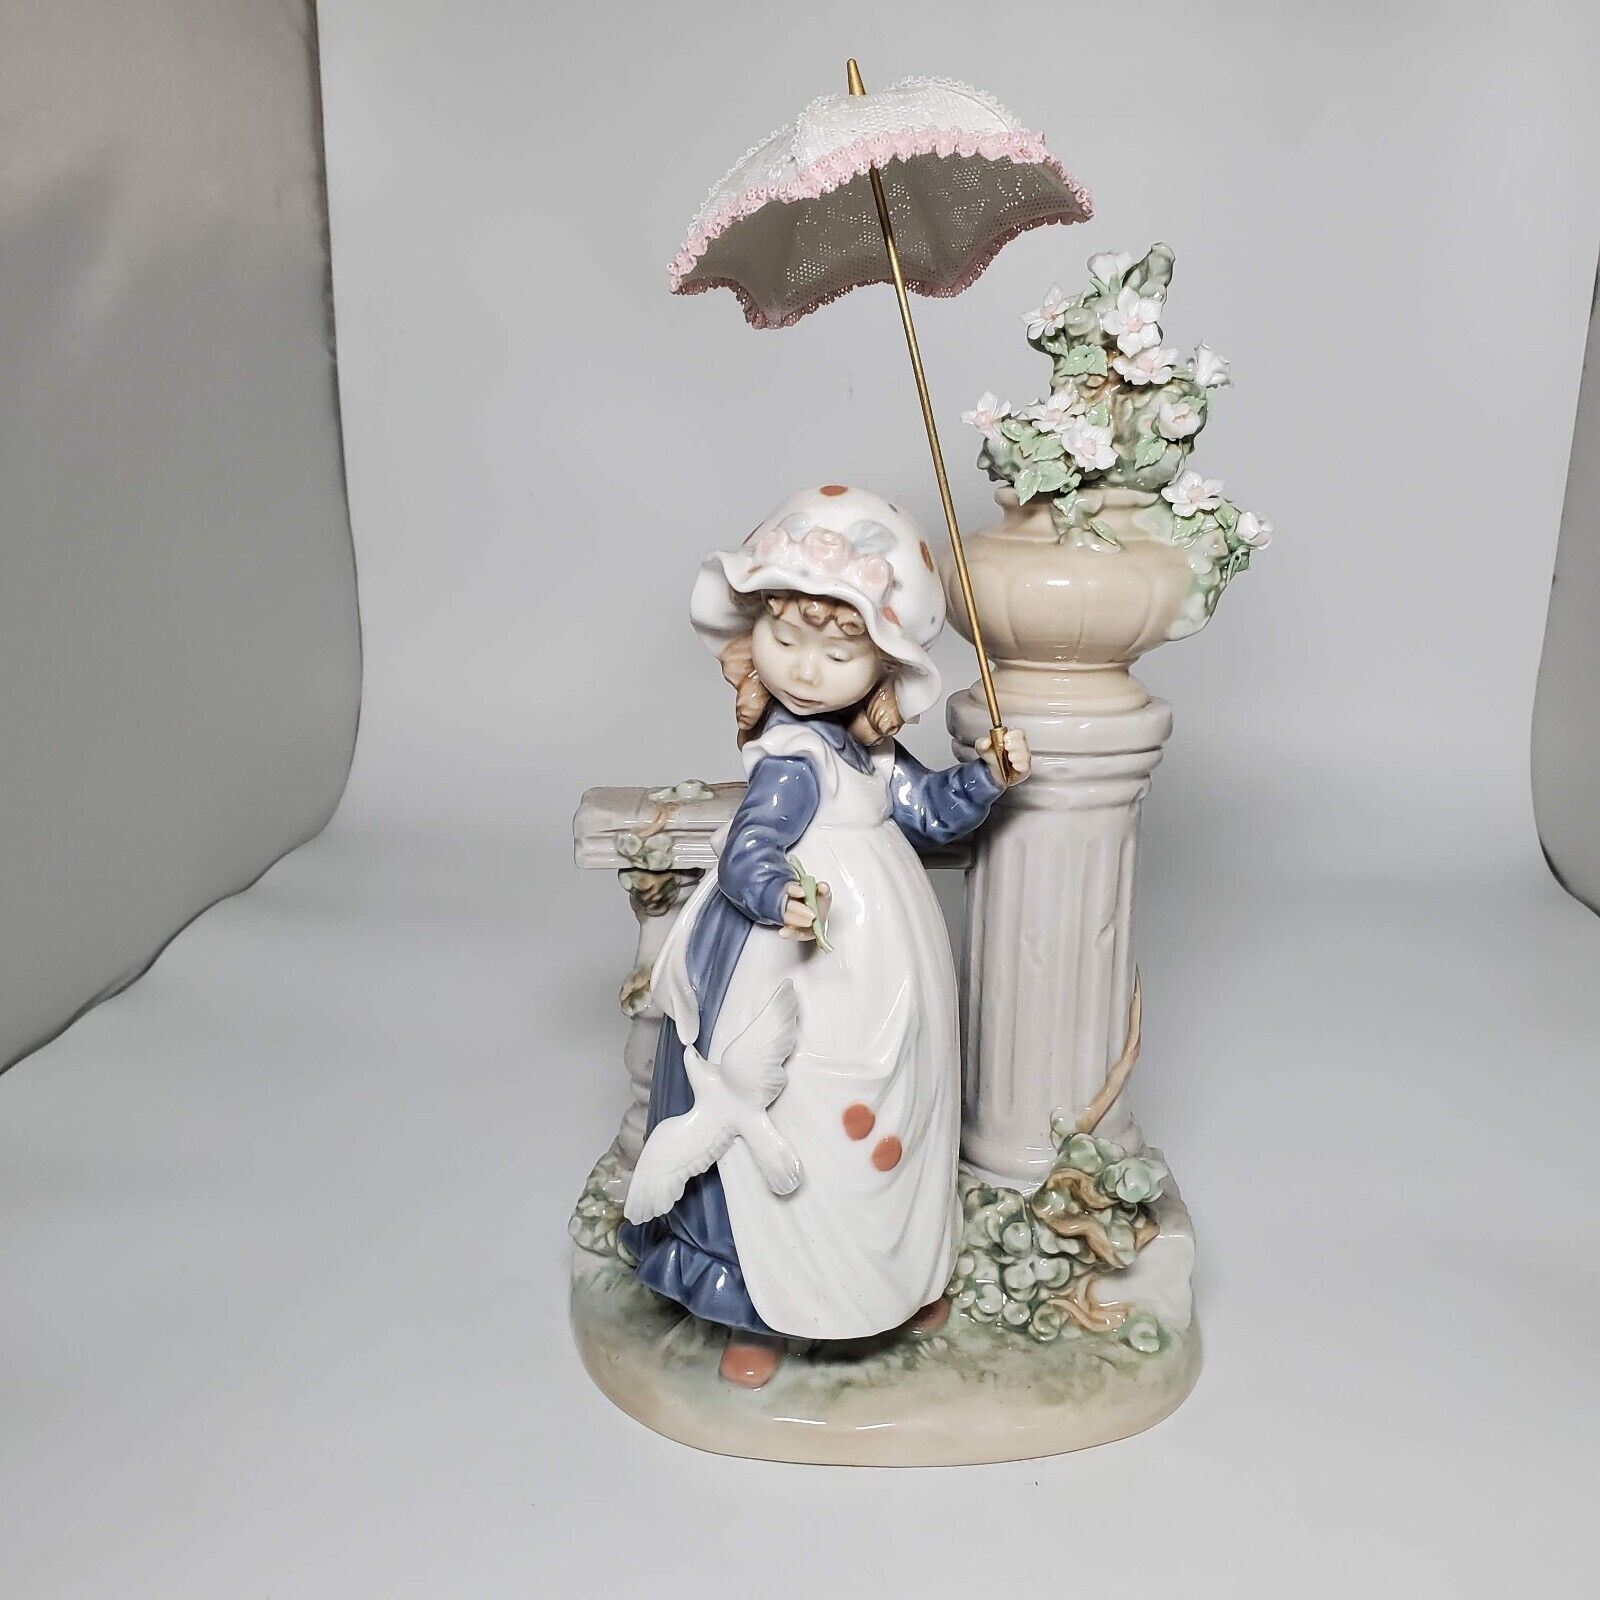 Lladro #5284 Glorious Spring Porcelain Figurine 1985 Signed with original box